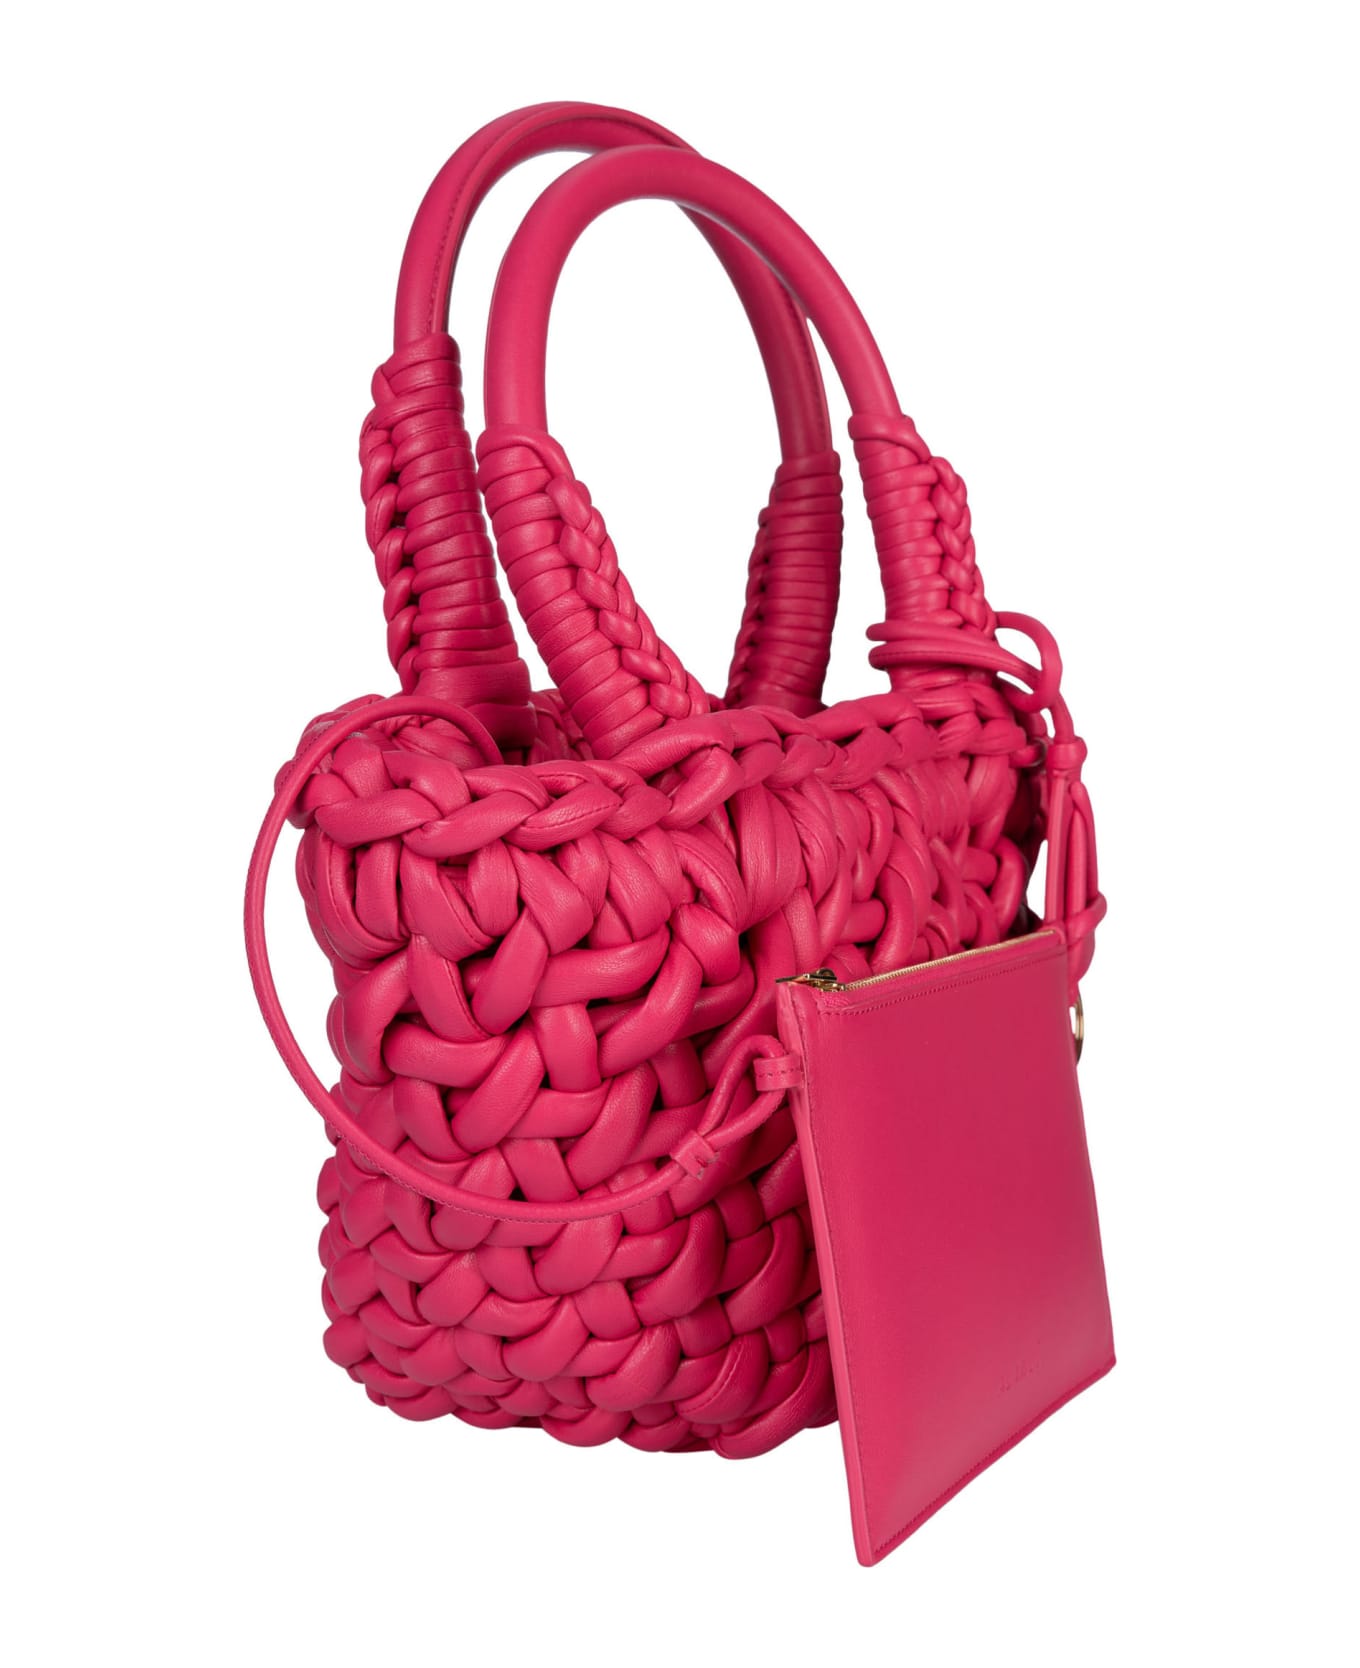 Alanui Weave Clutch Detail Tote - Pink